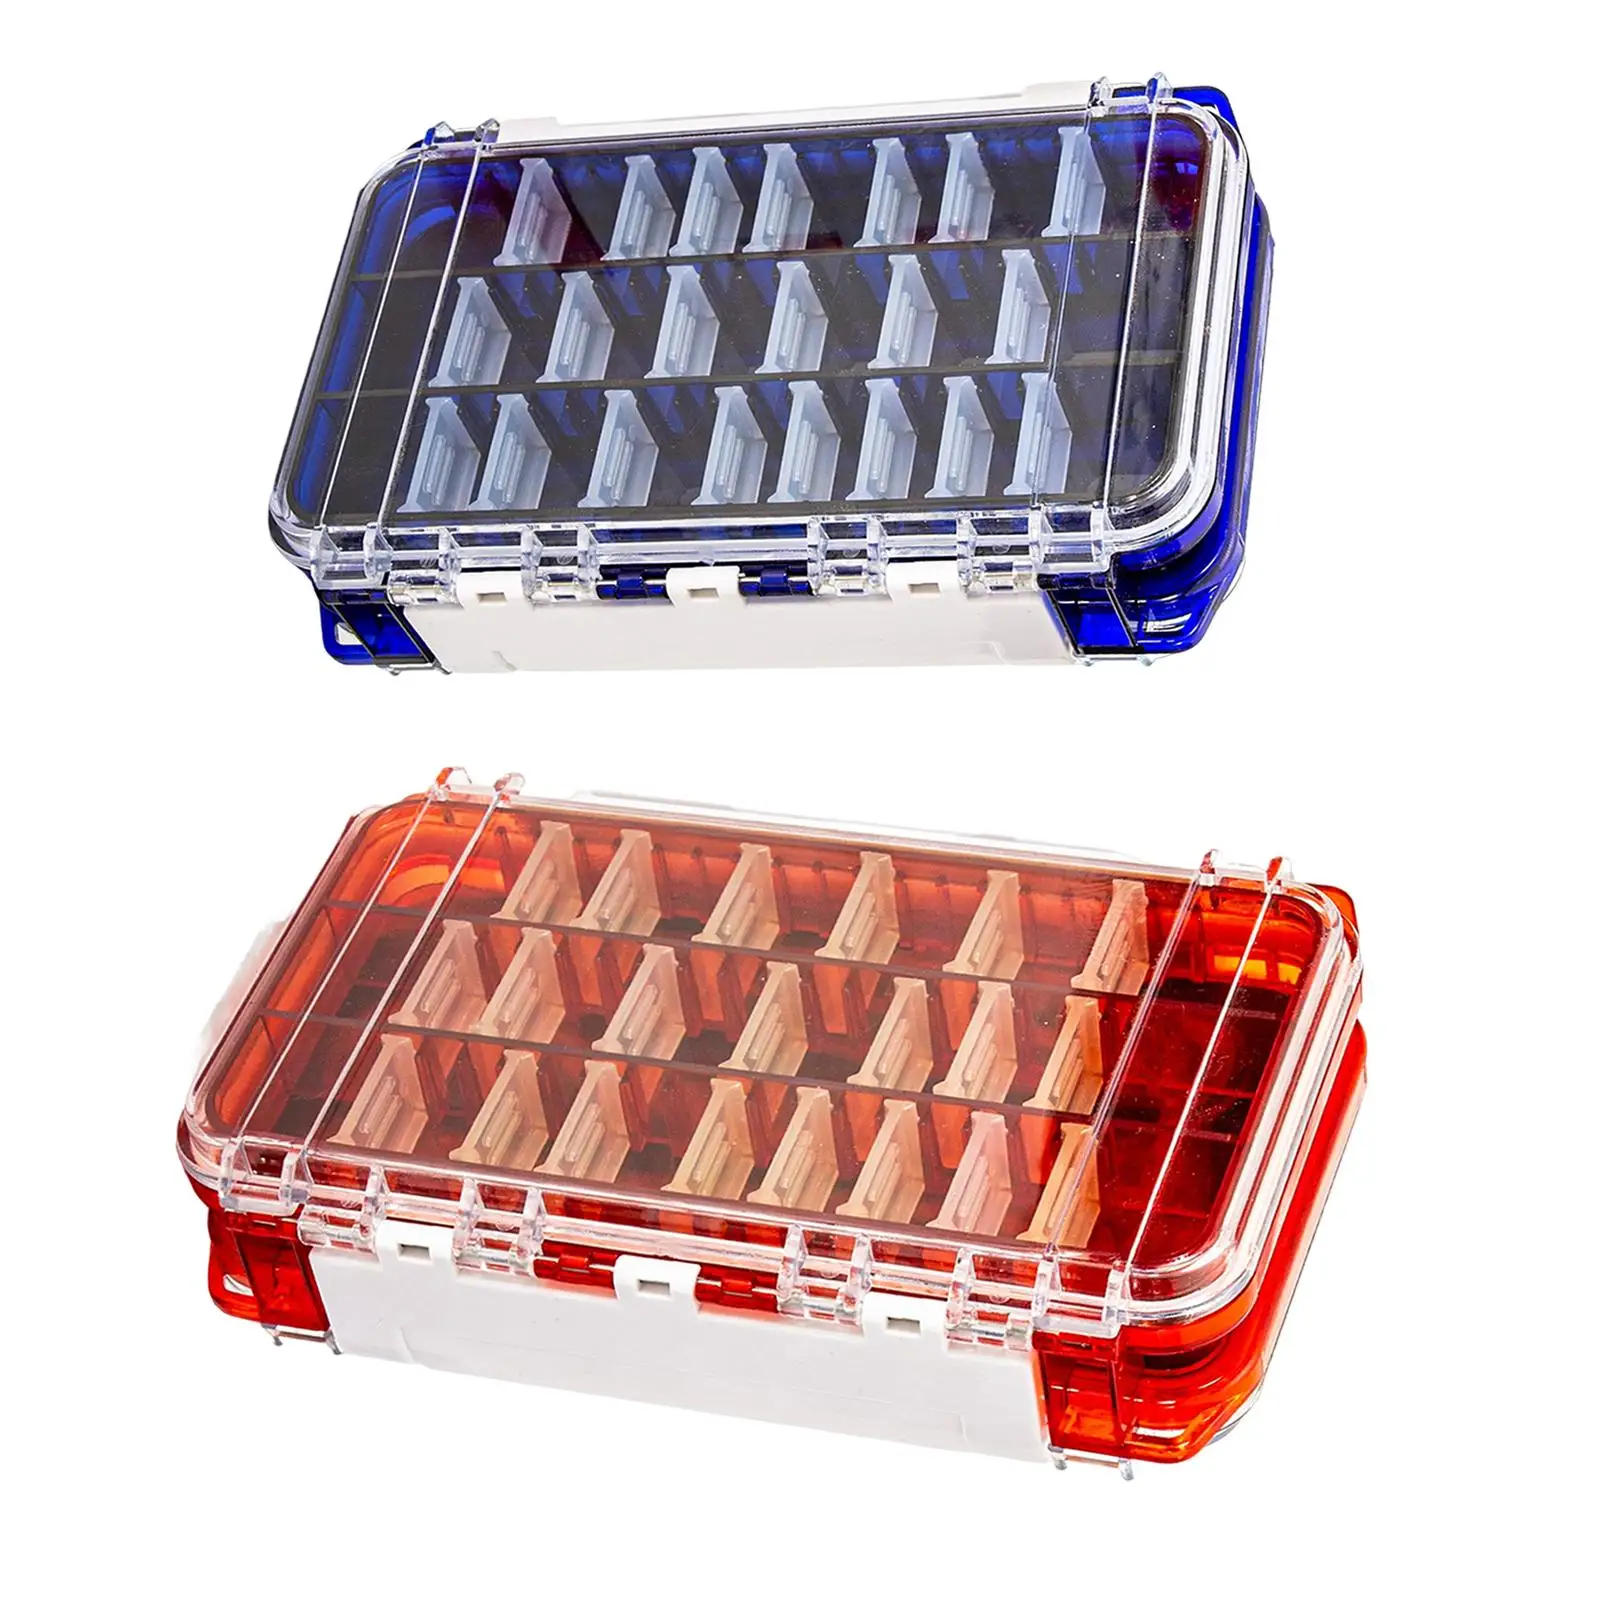 Waterproof Fishing Tackle Box Double Sided with Dividers Transparent Organizer